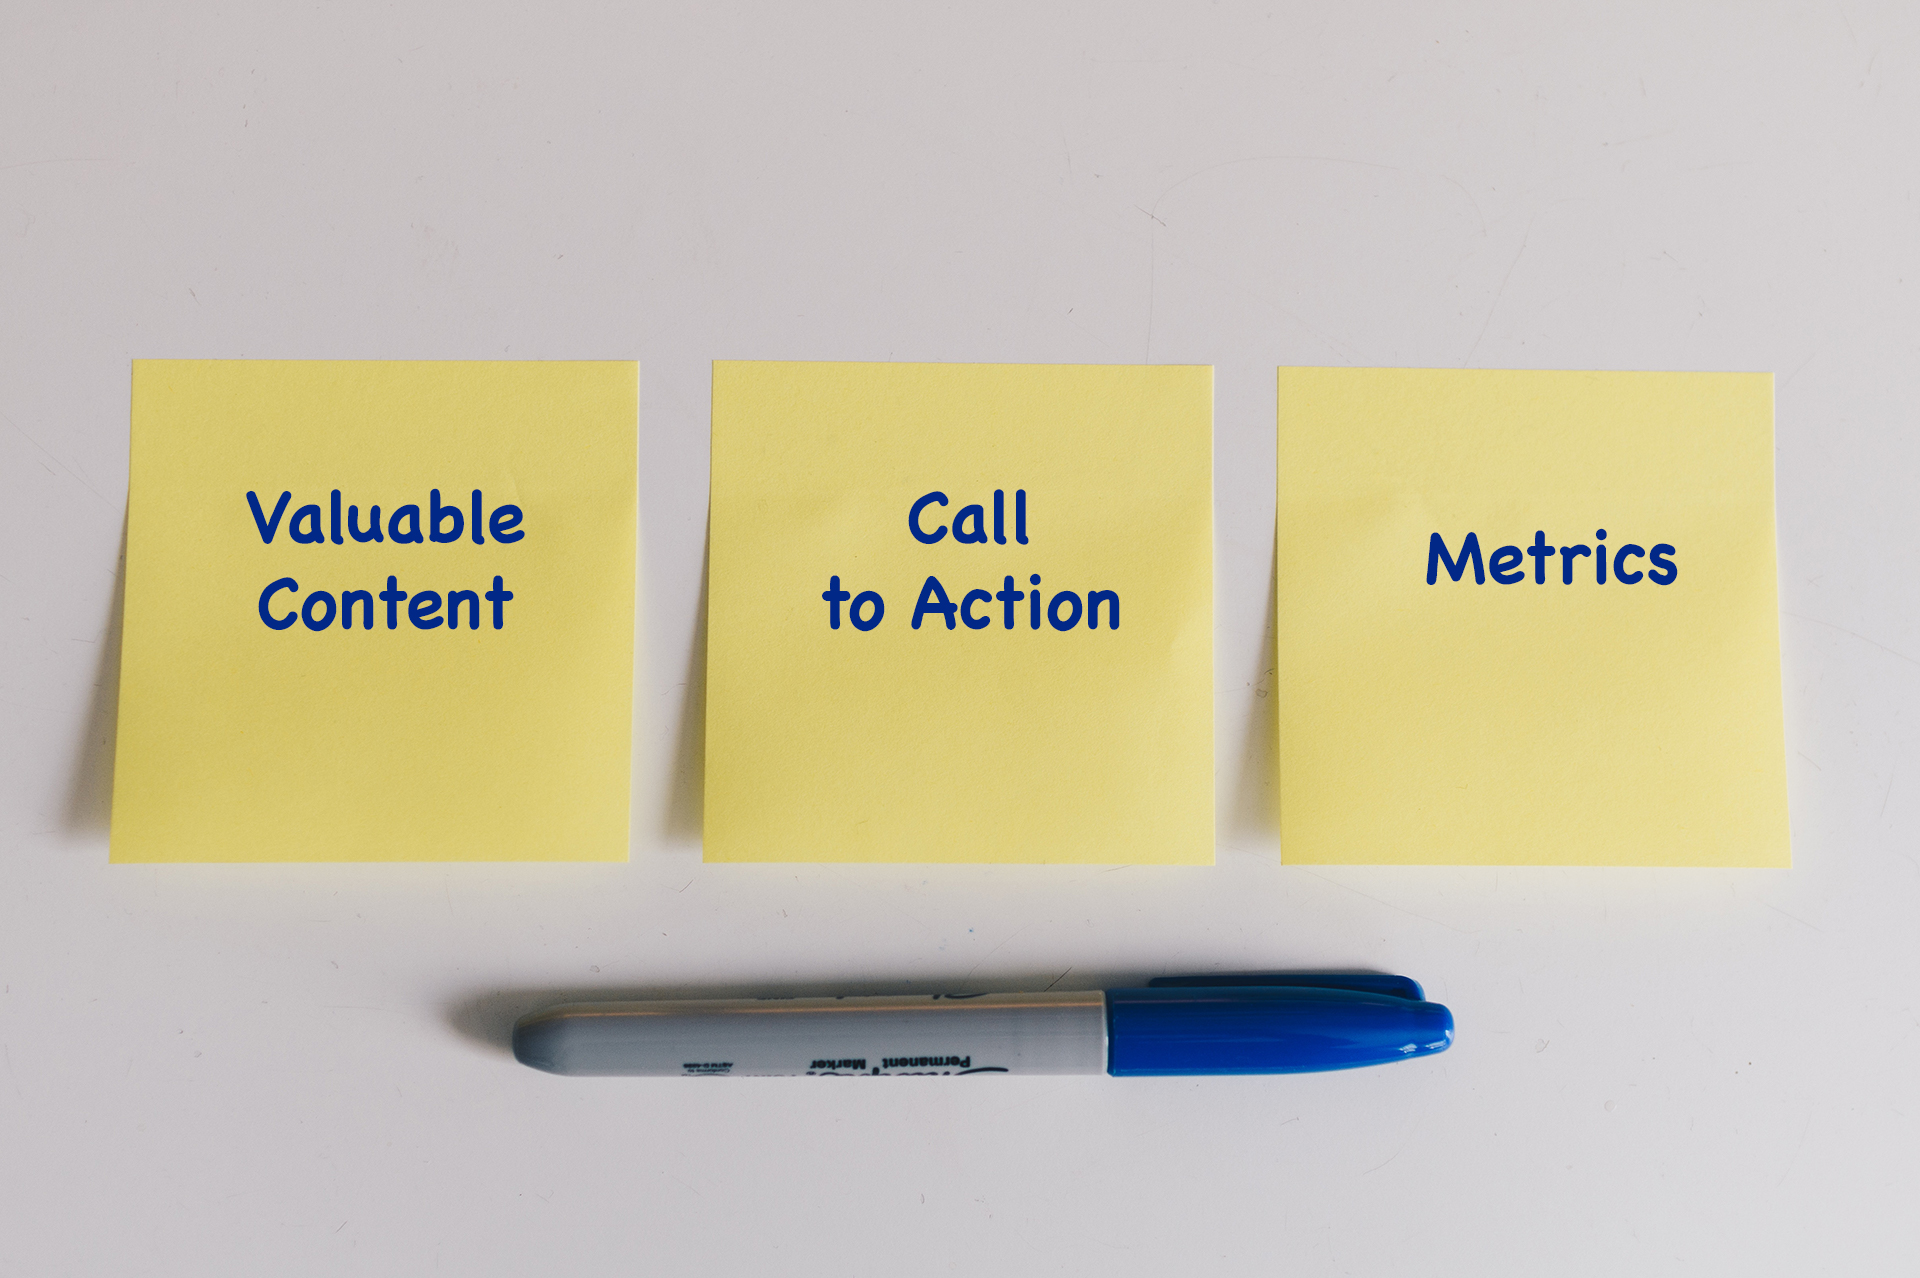 Valuable Content + Call to Action + Metrics